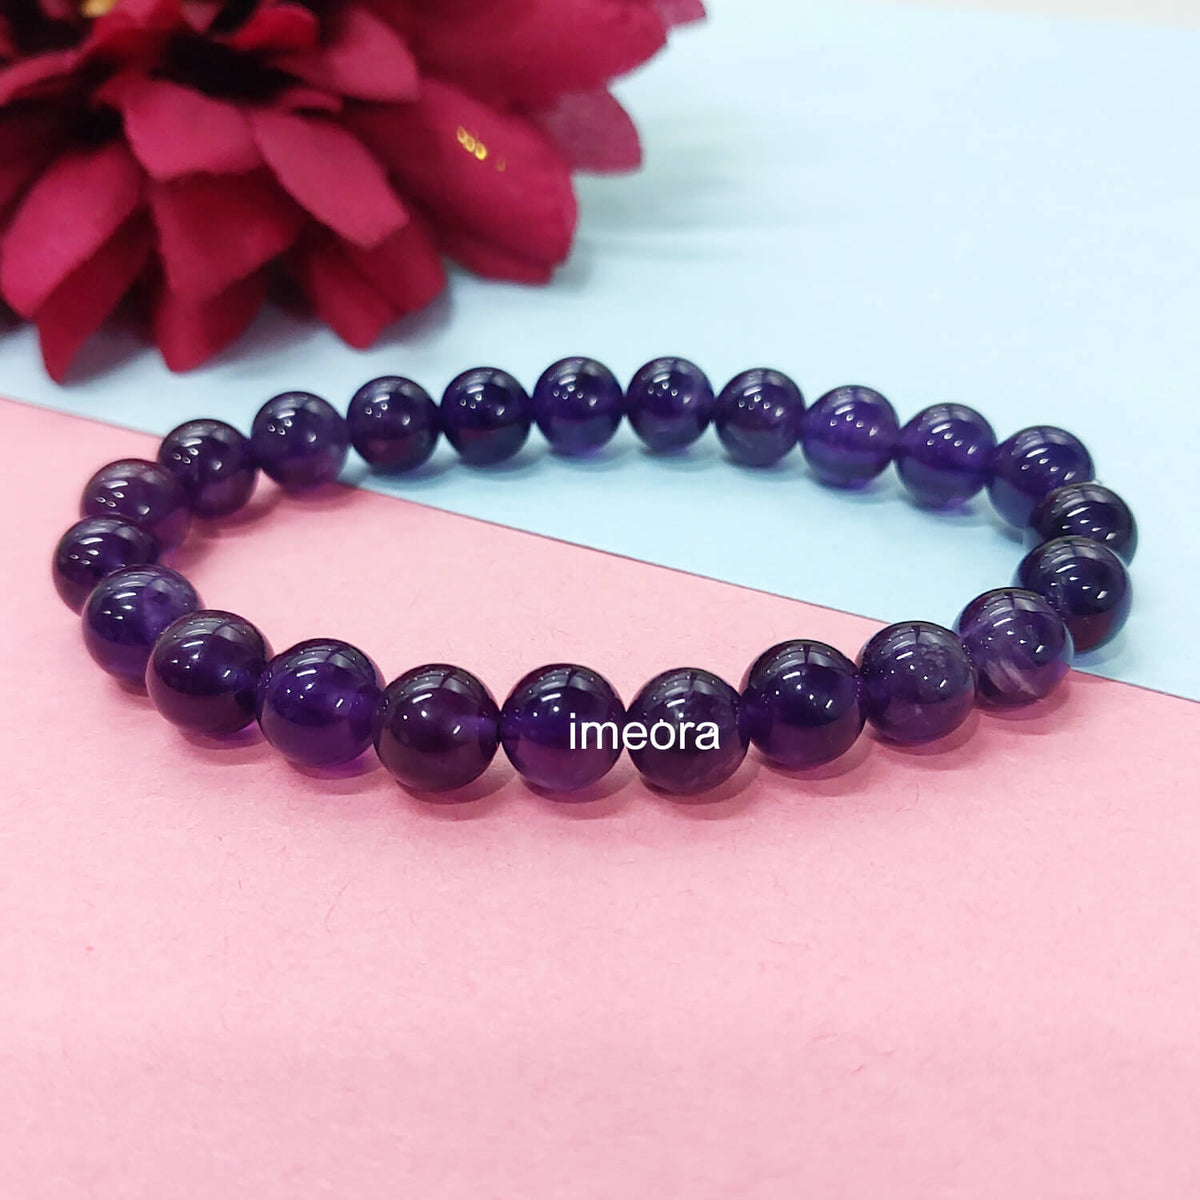 What Are the Amethyst Stone Benefits Astrology?